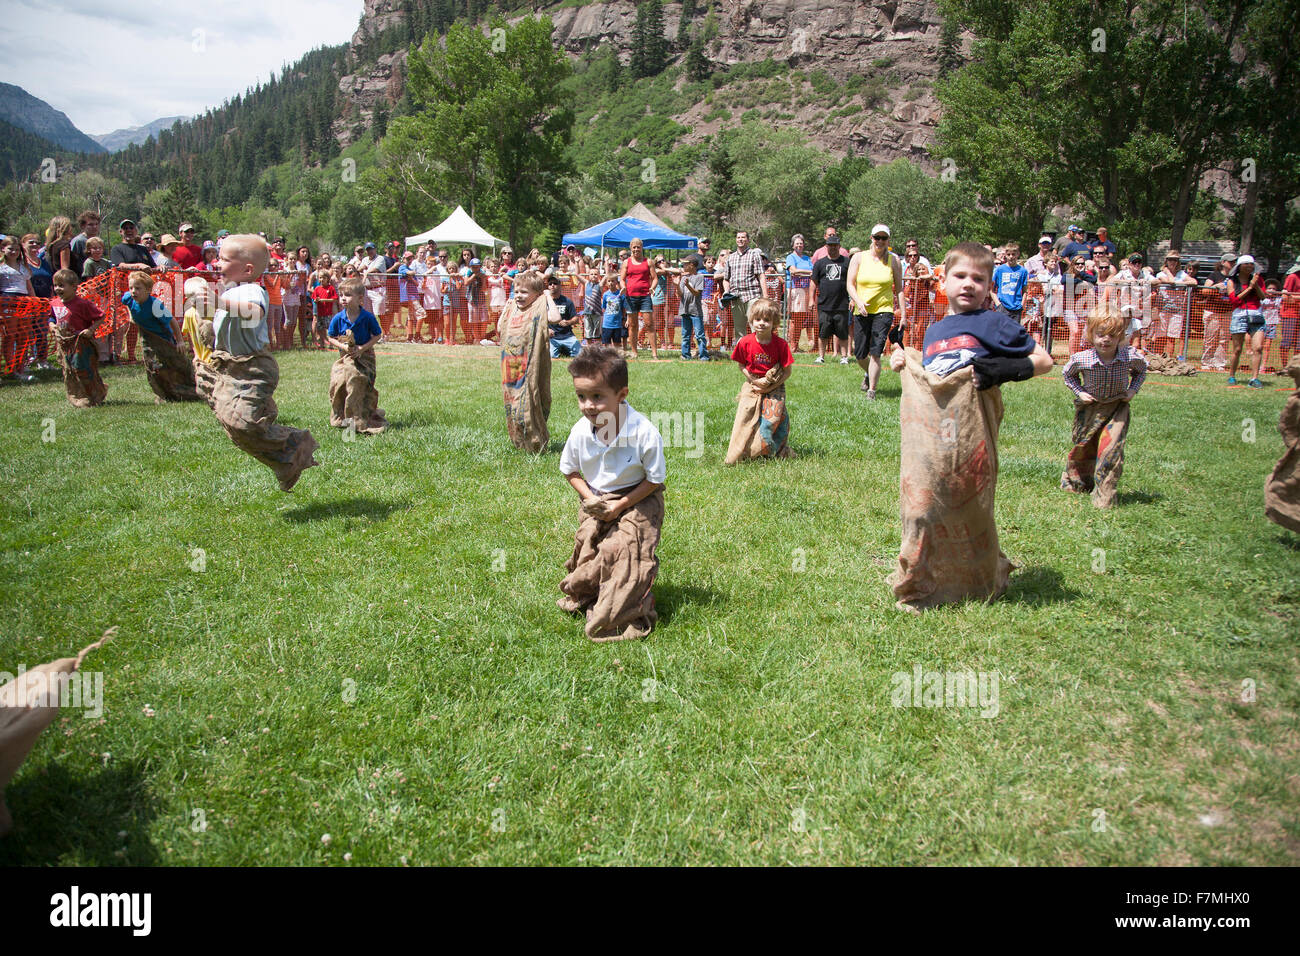 Young boys compete in Three Legged race in Ouray, Colorado, July 4, Indpendence Day annual picnic event Stock Photo